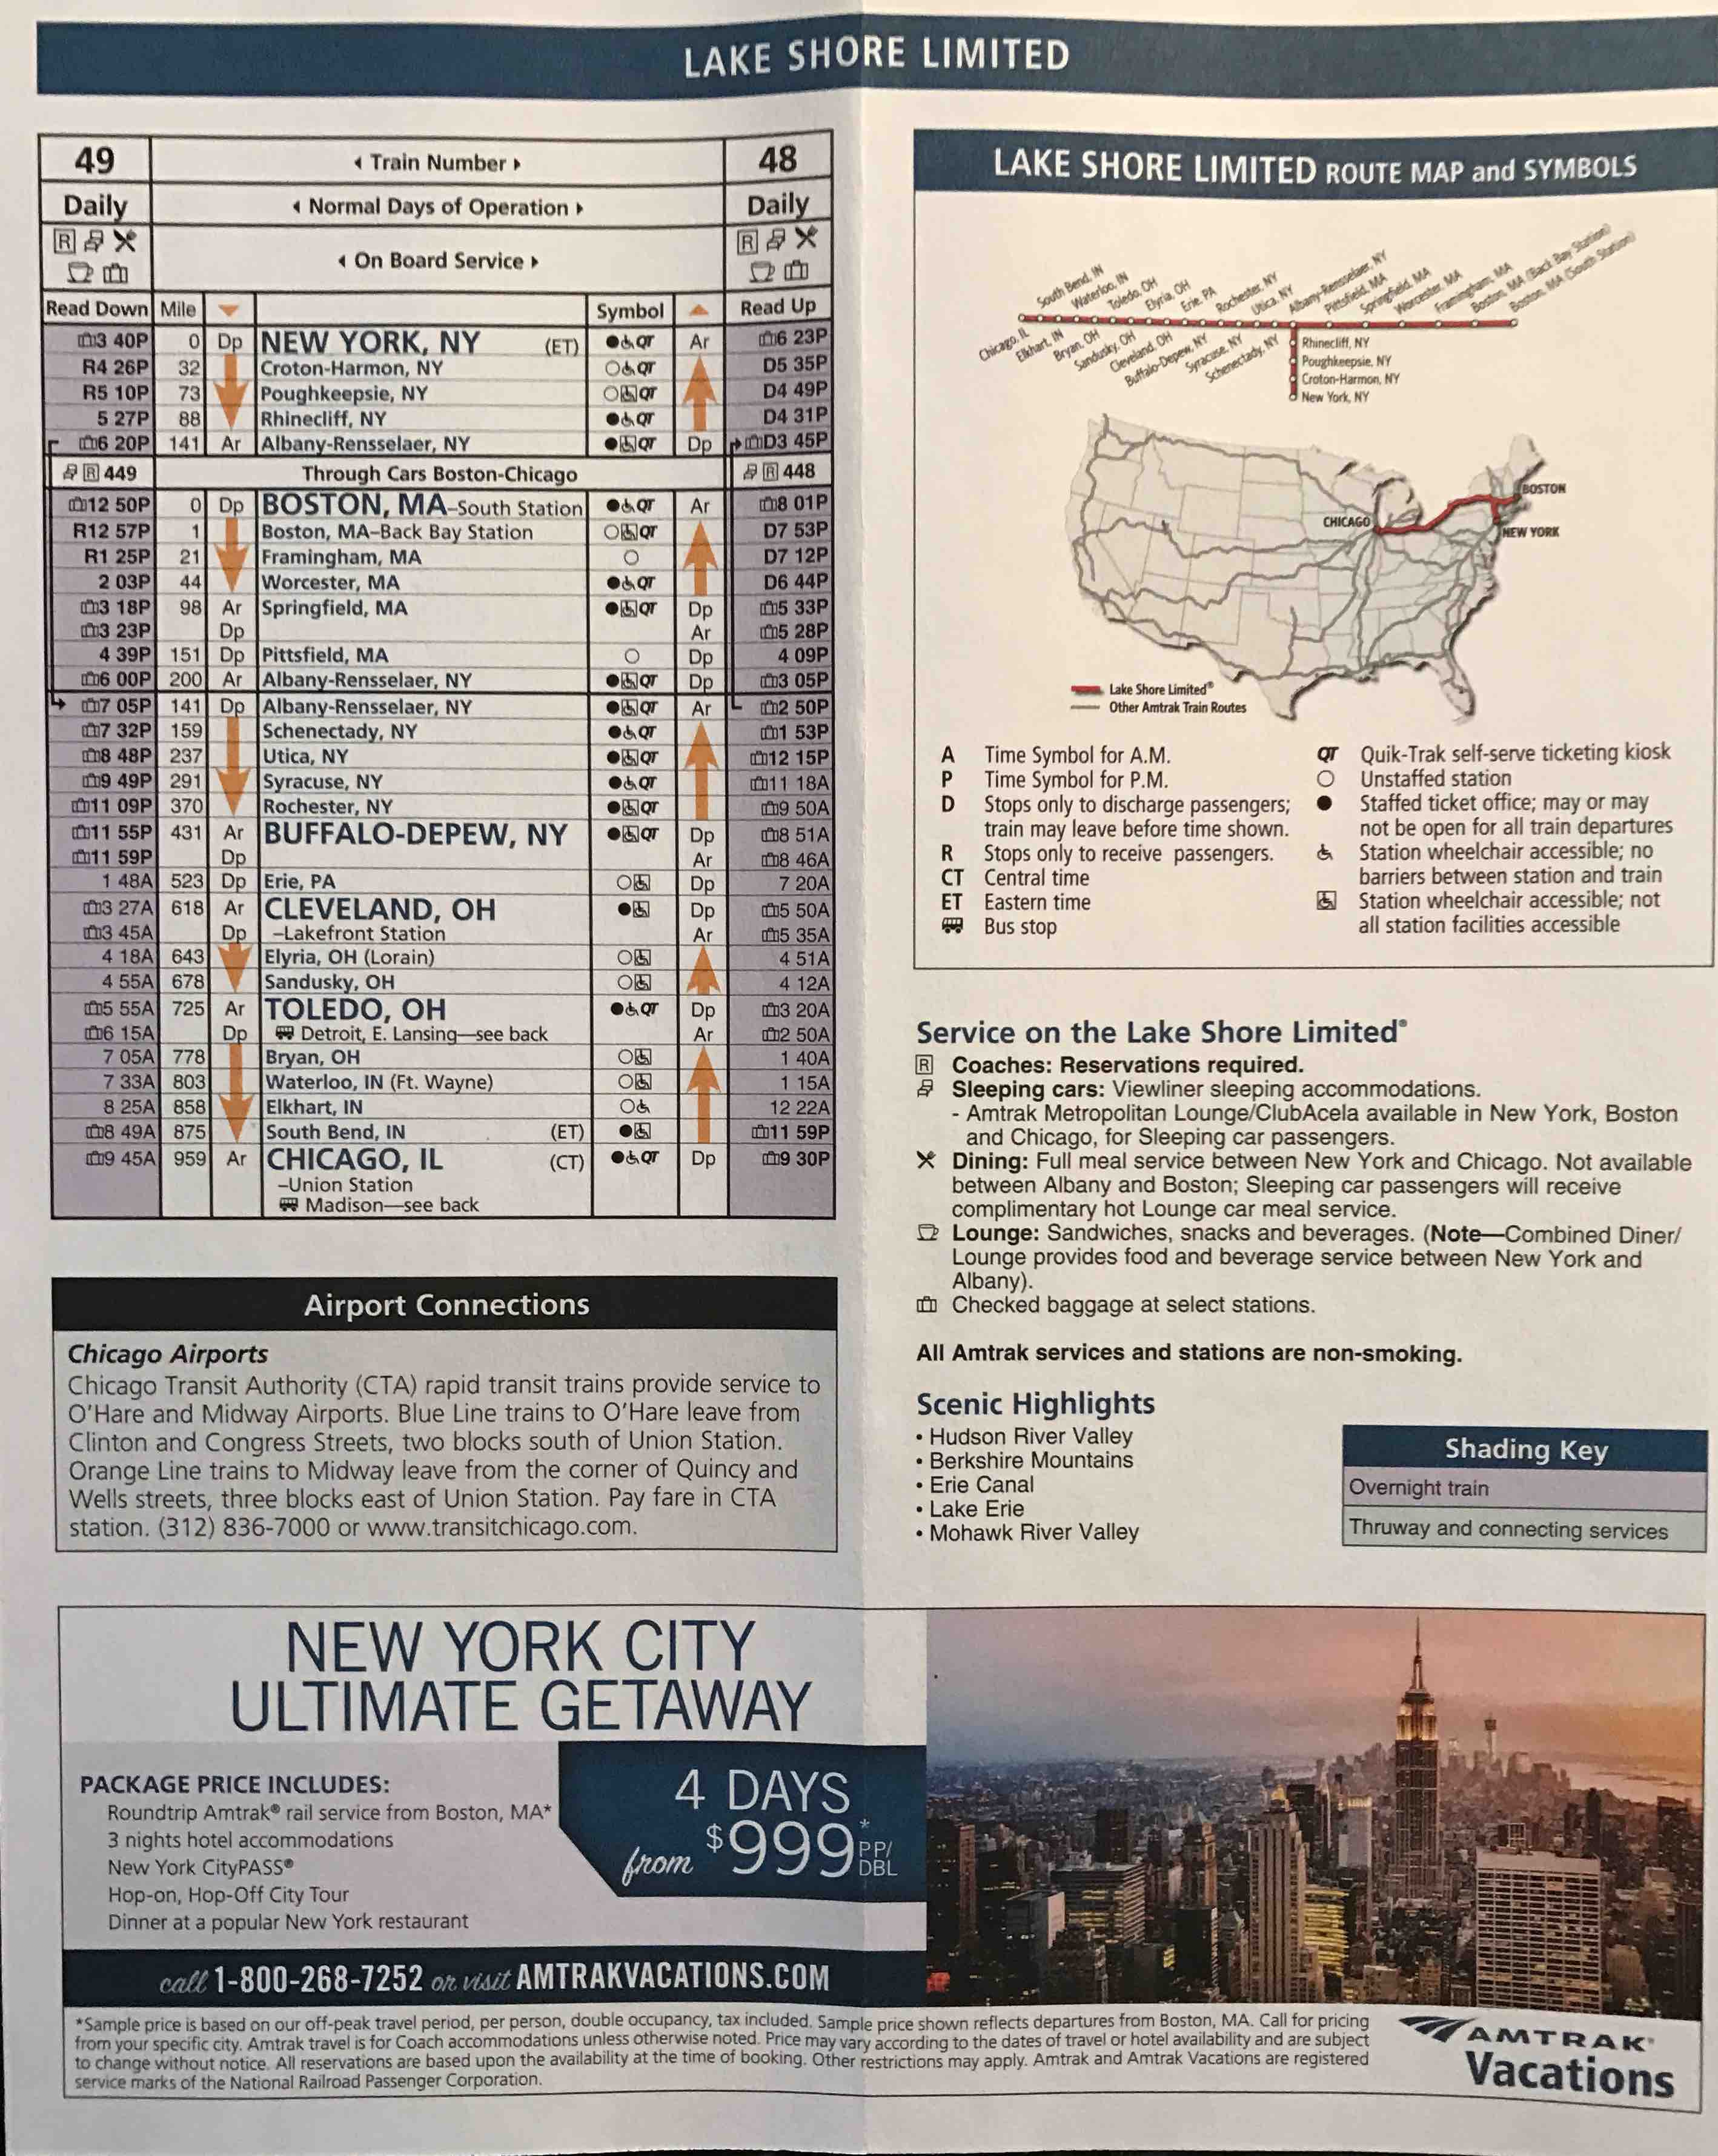 Amtrak lake shore limited schedule 2